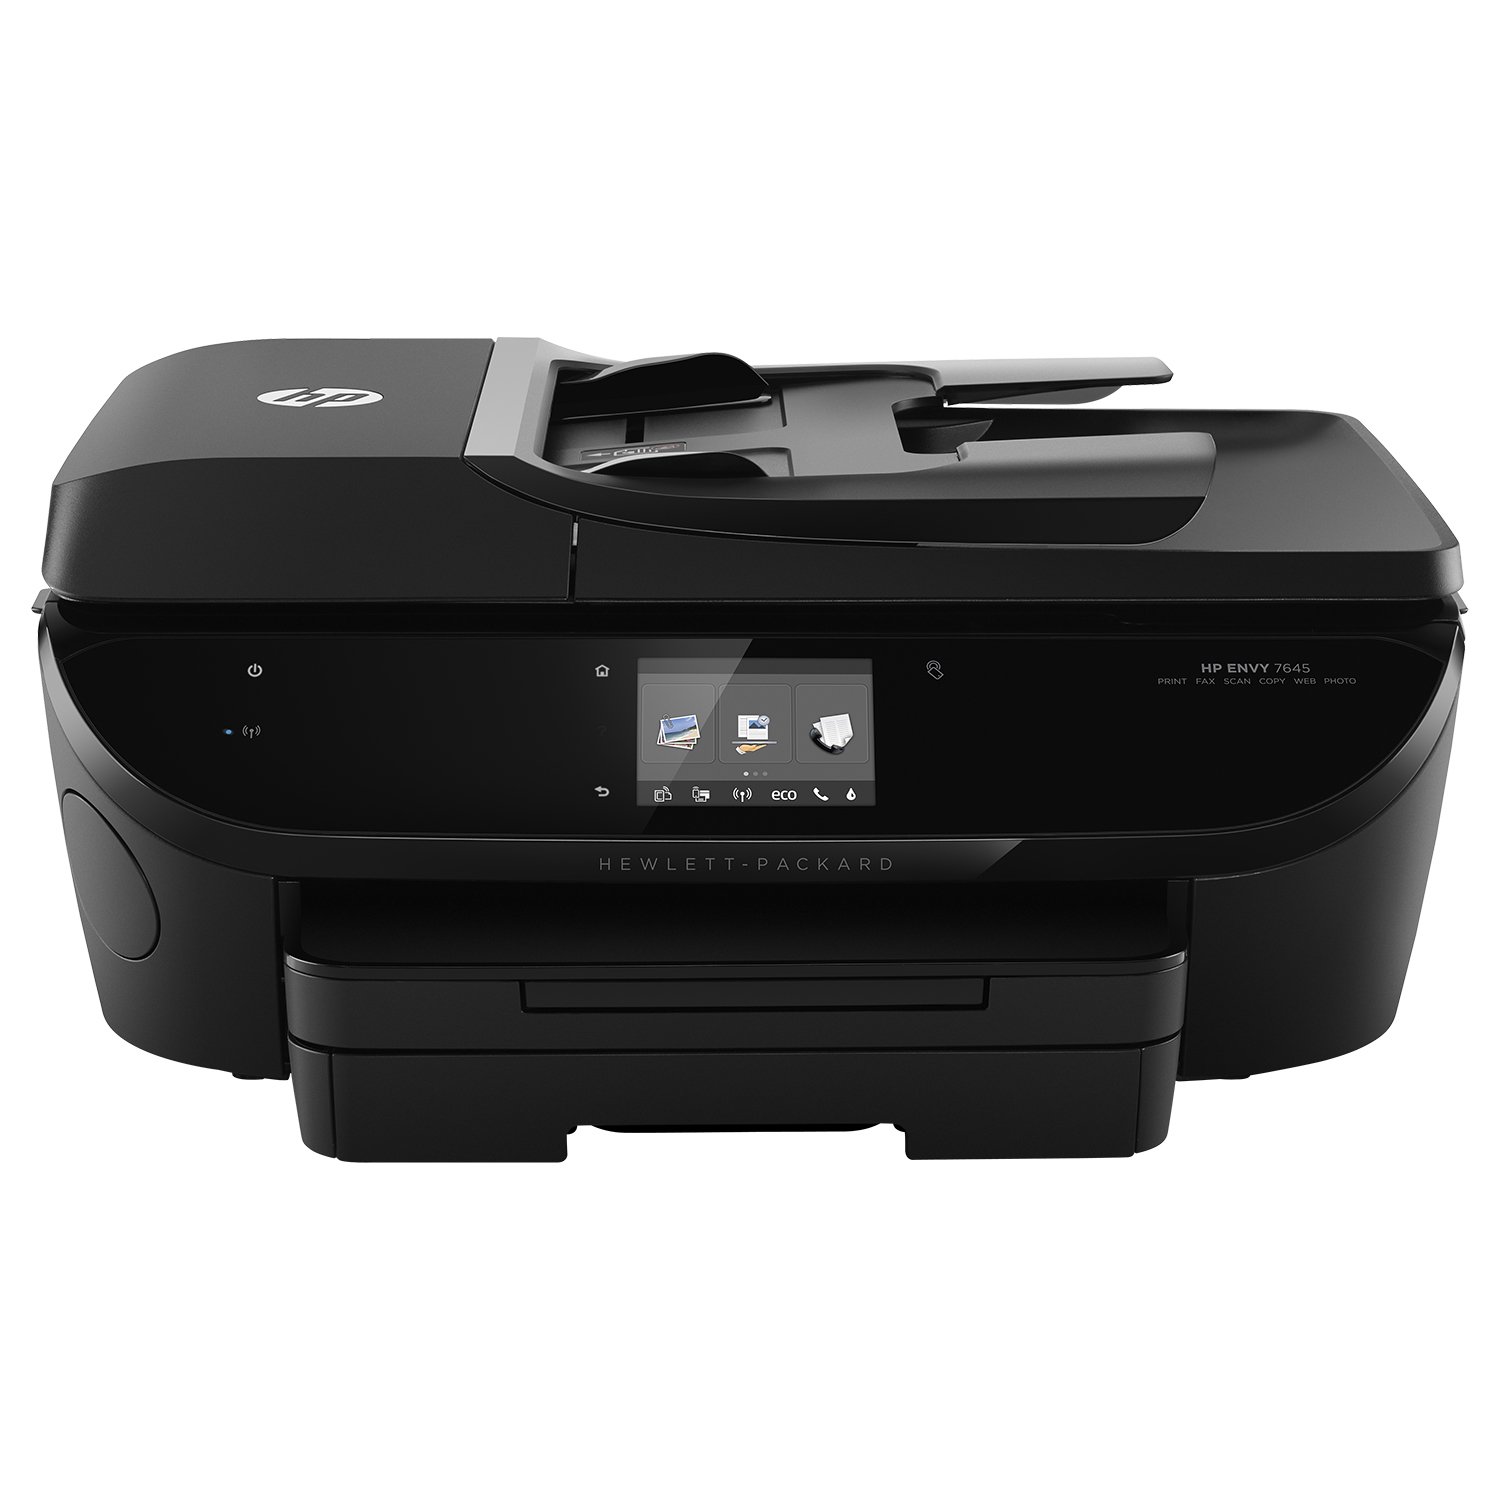 OfficeJet 5740 e-All-in-One Printer series